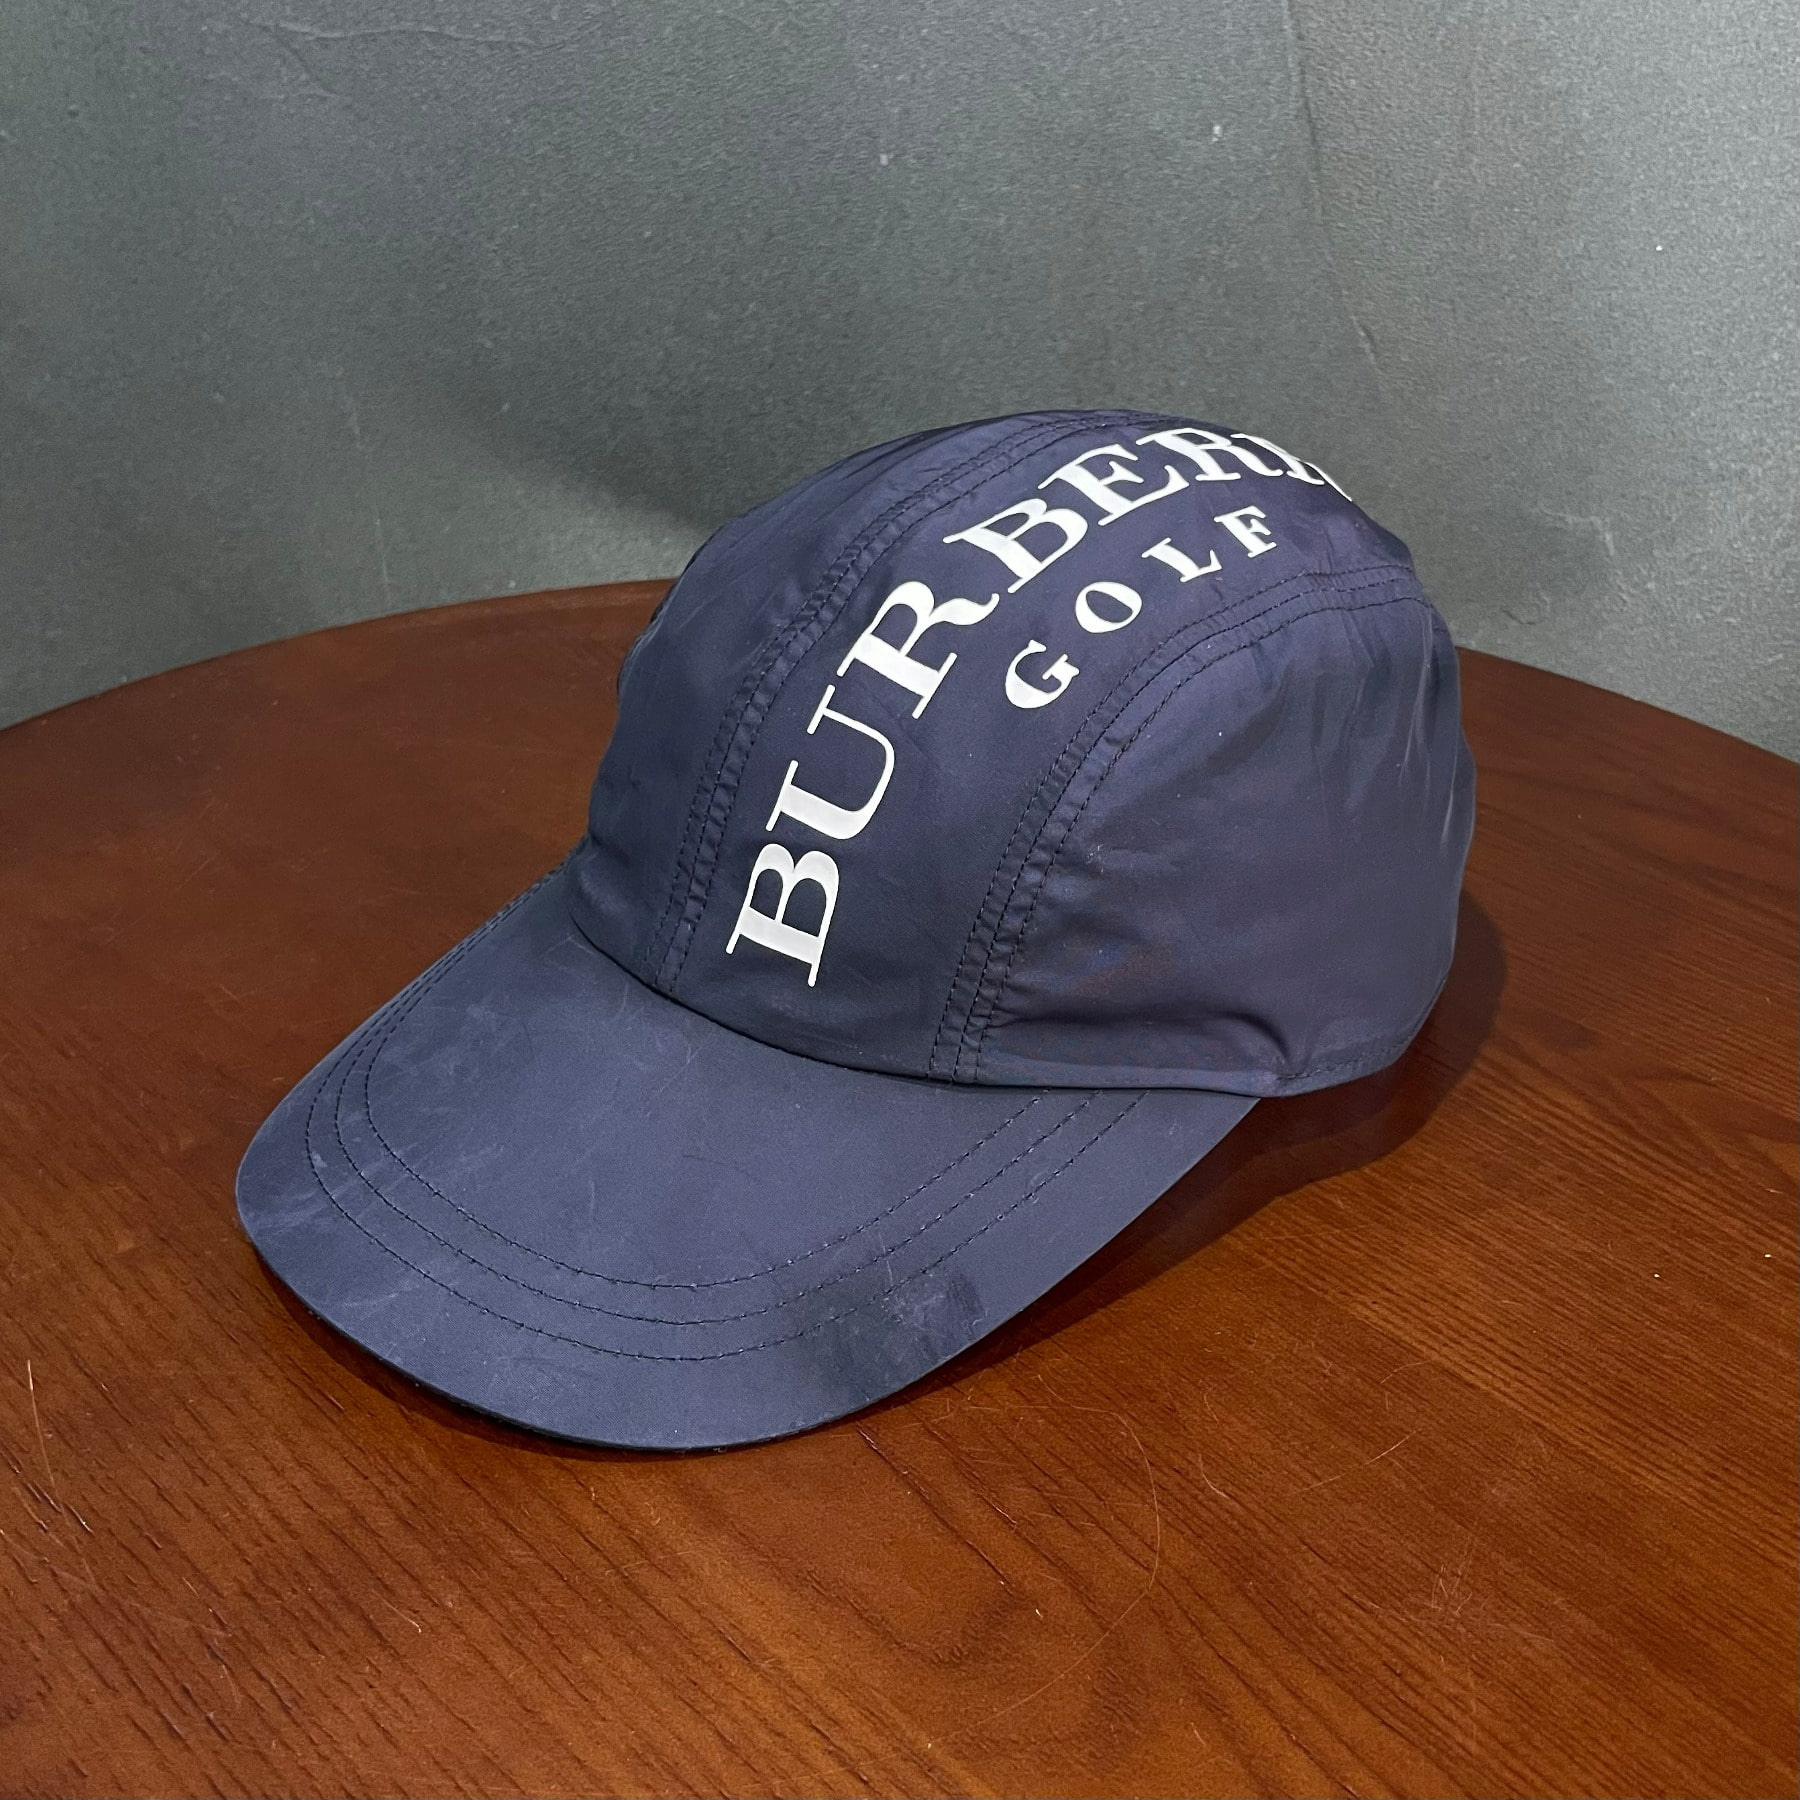 Burberry Golf 4 Panel Cap (Made in JAPAN)